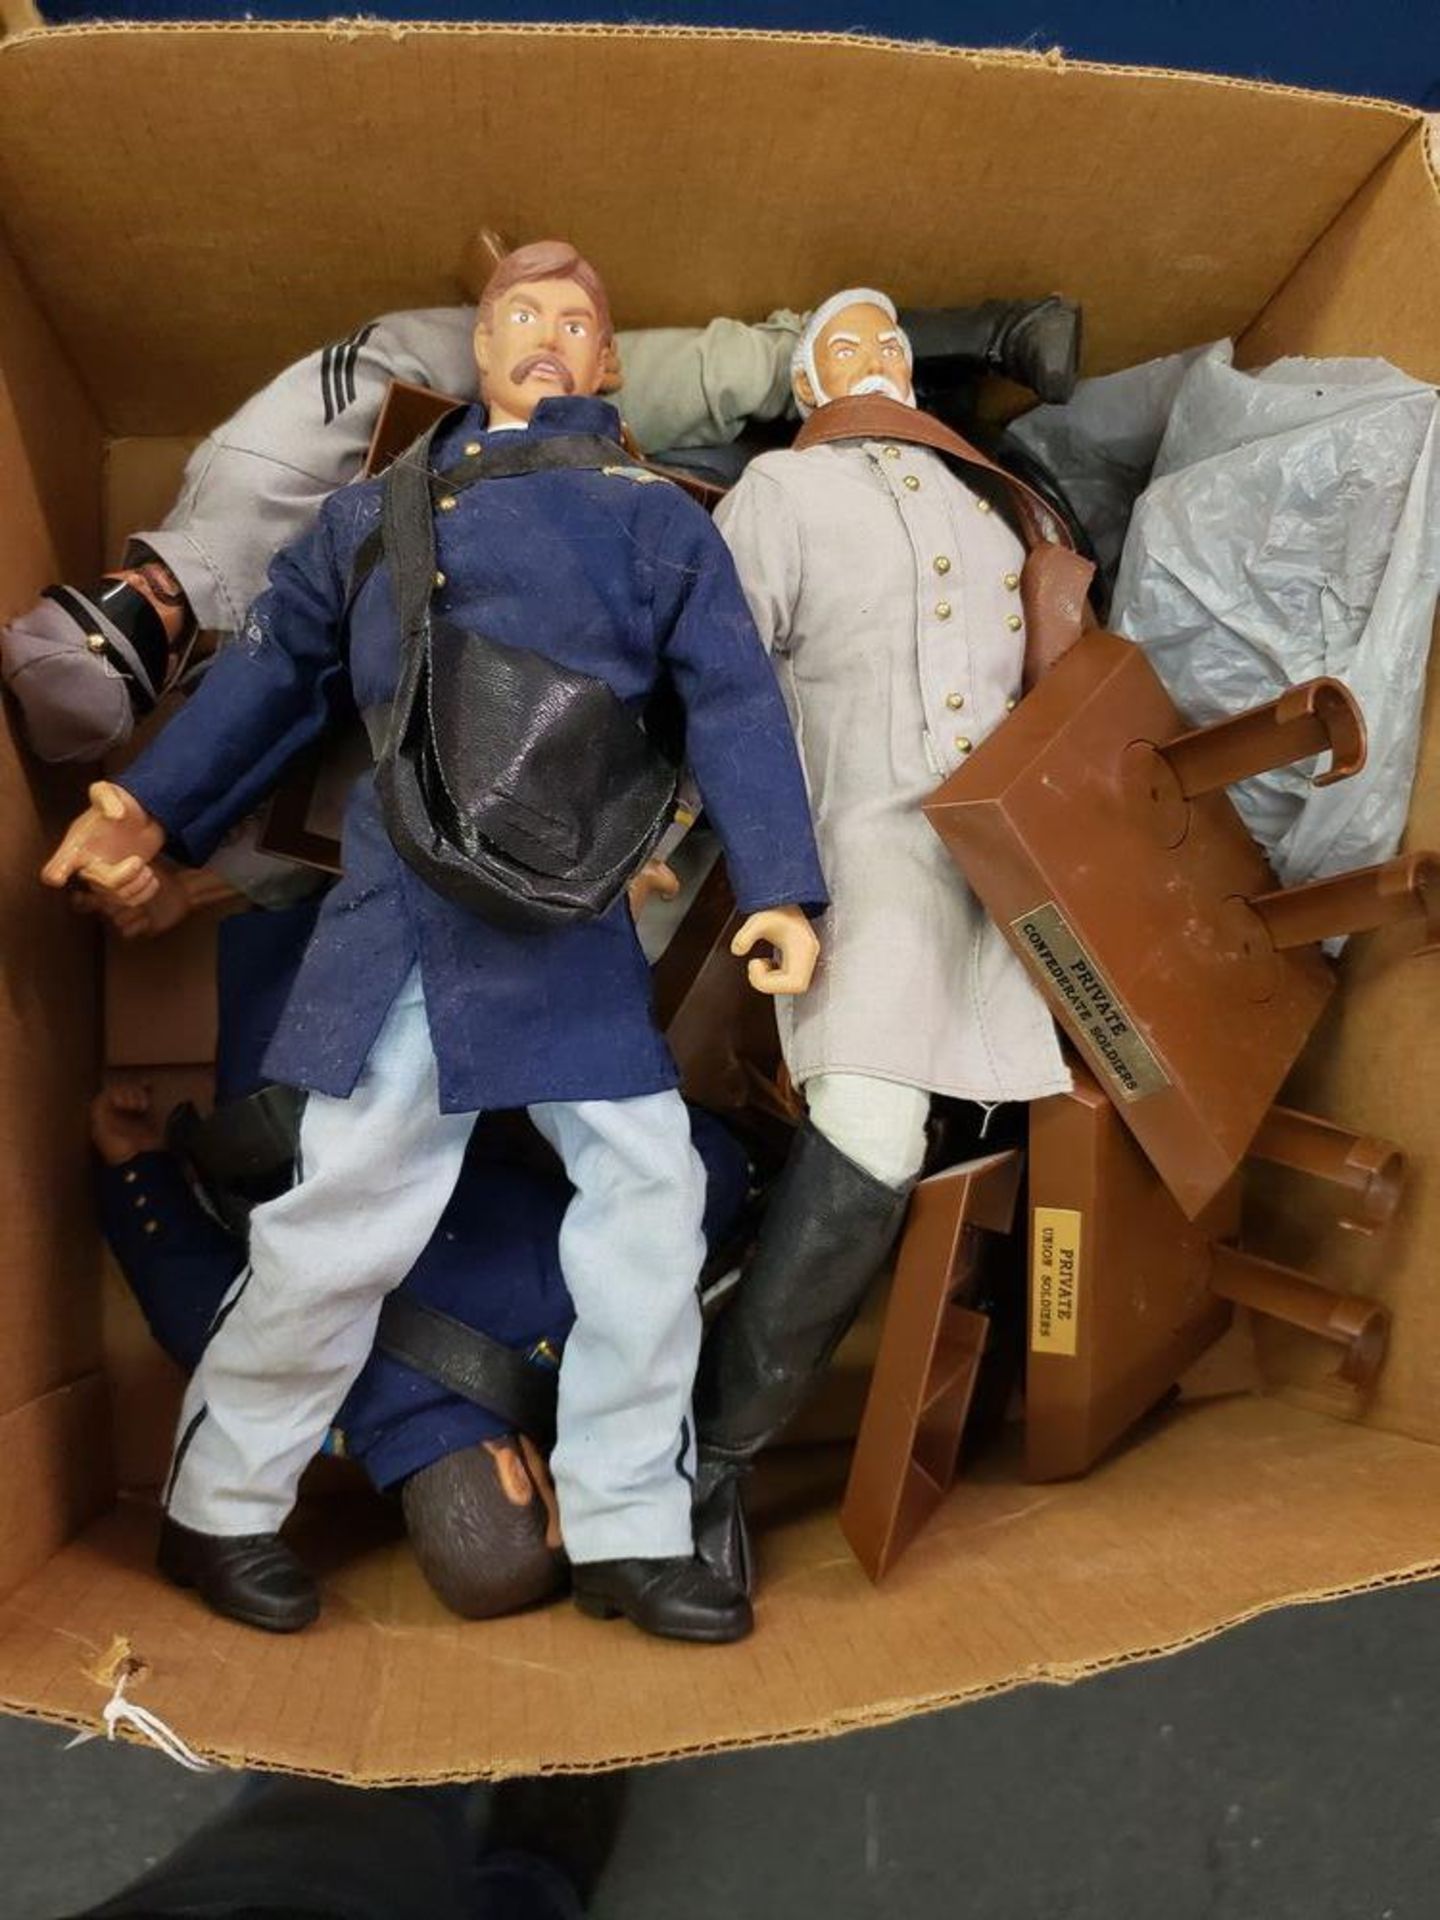 BOX OF VINTAGE SOLDIER ACTION FIGURES - Image 2 of 2